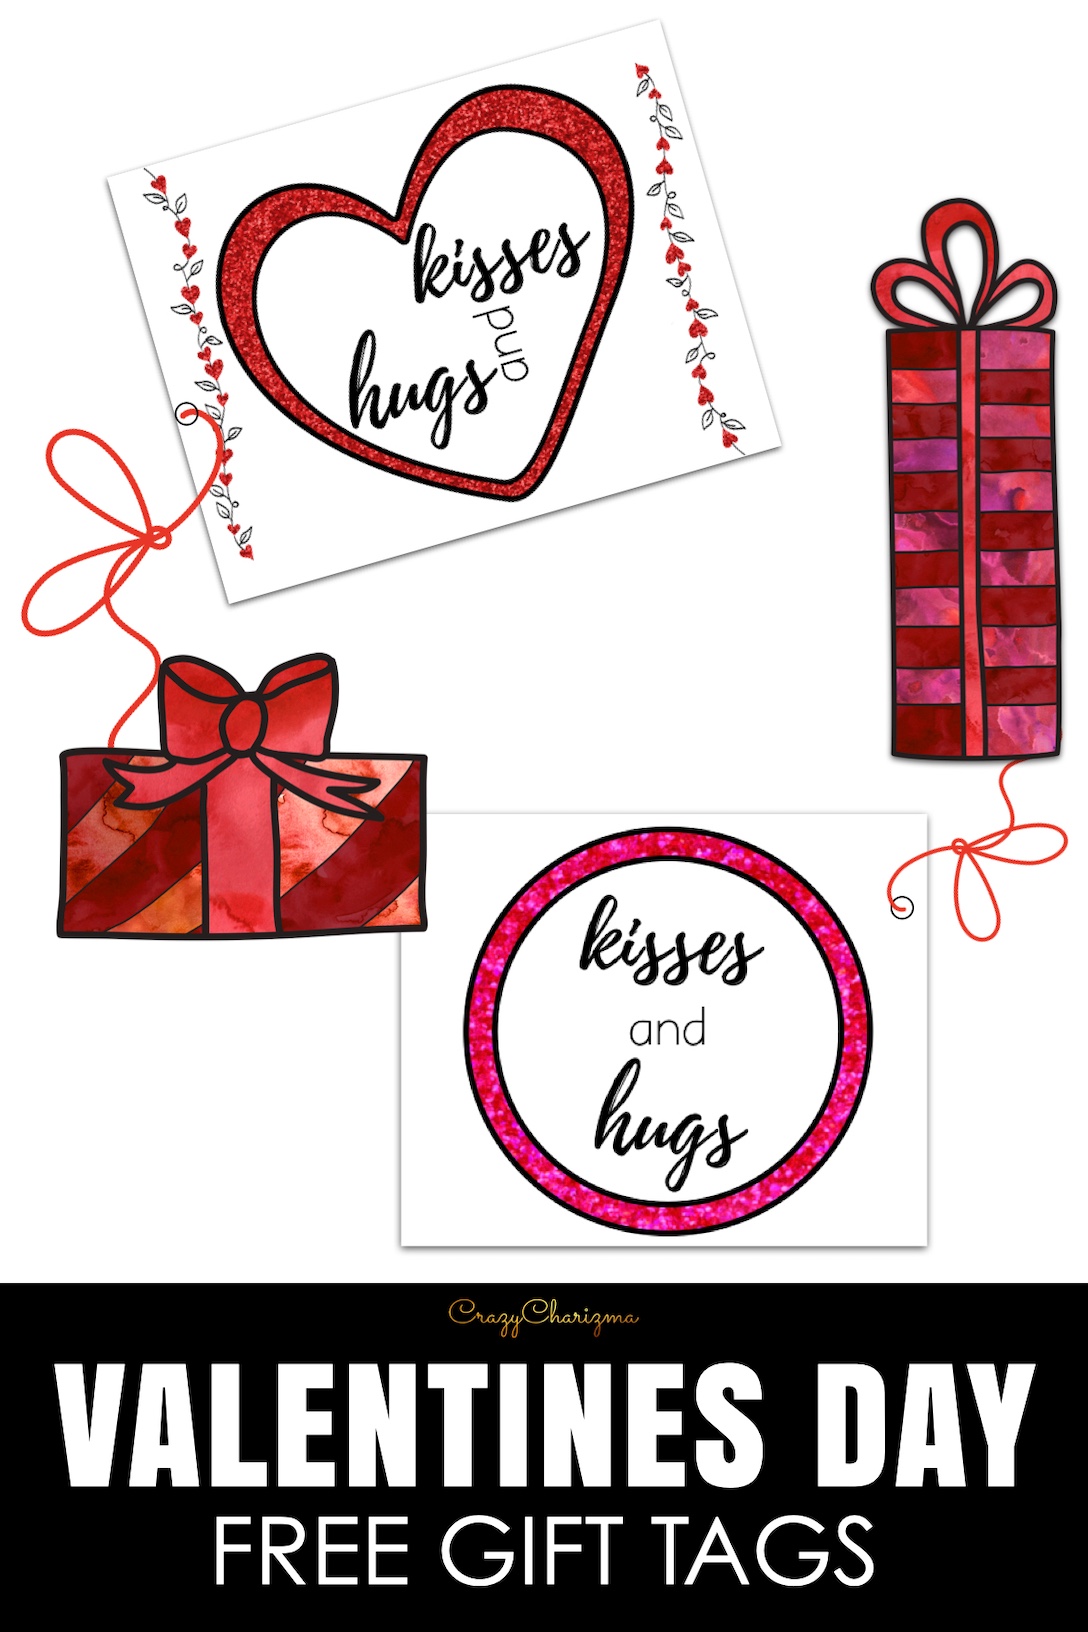 Spread love with our free printable Valentine tags - add a personal touch to gifts, treats, and decorations this Valentine's Day! Download now.